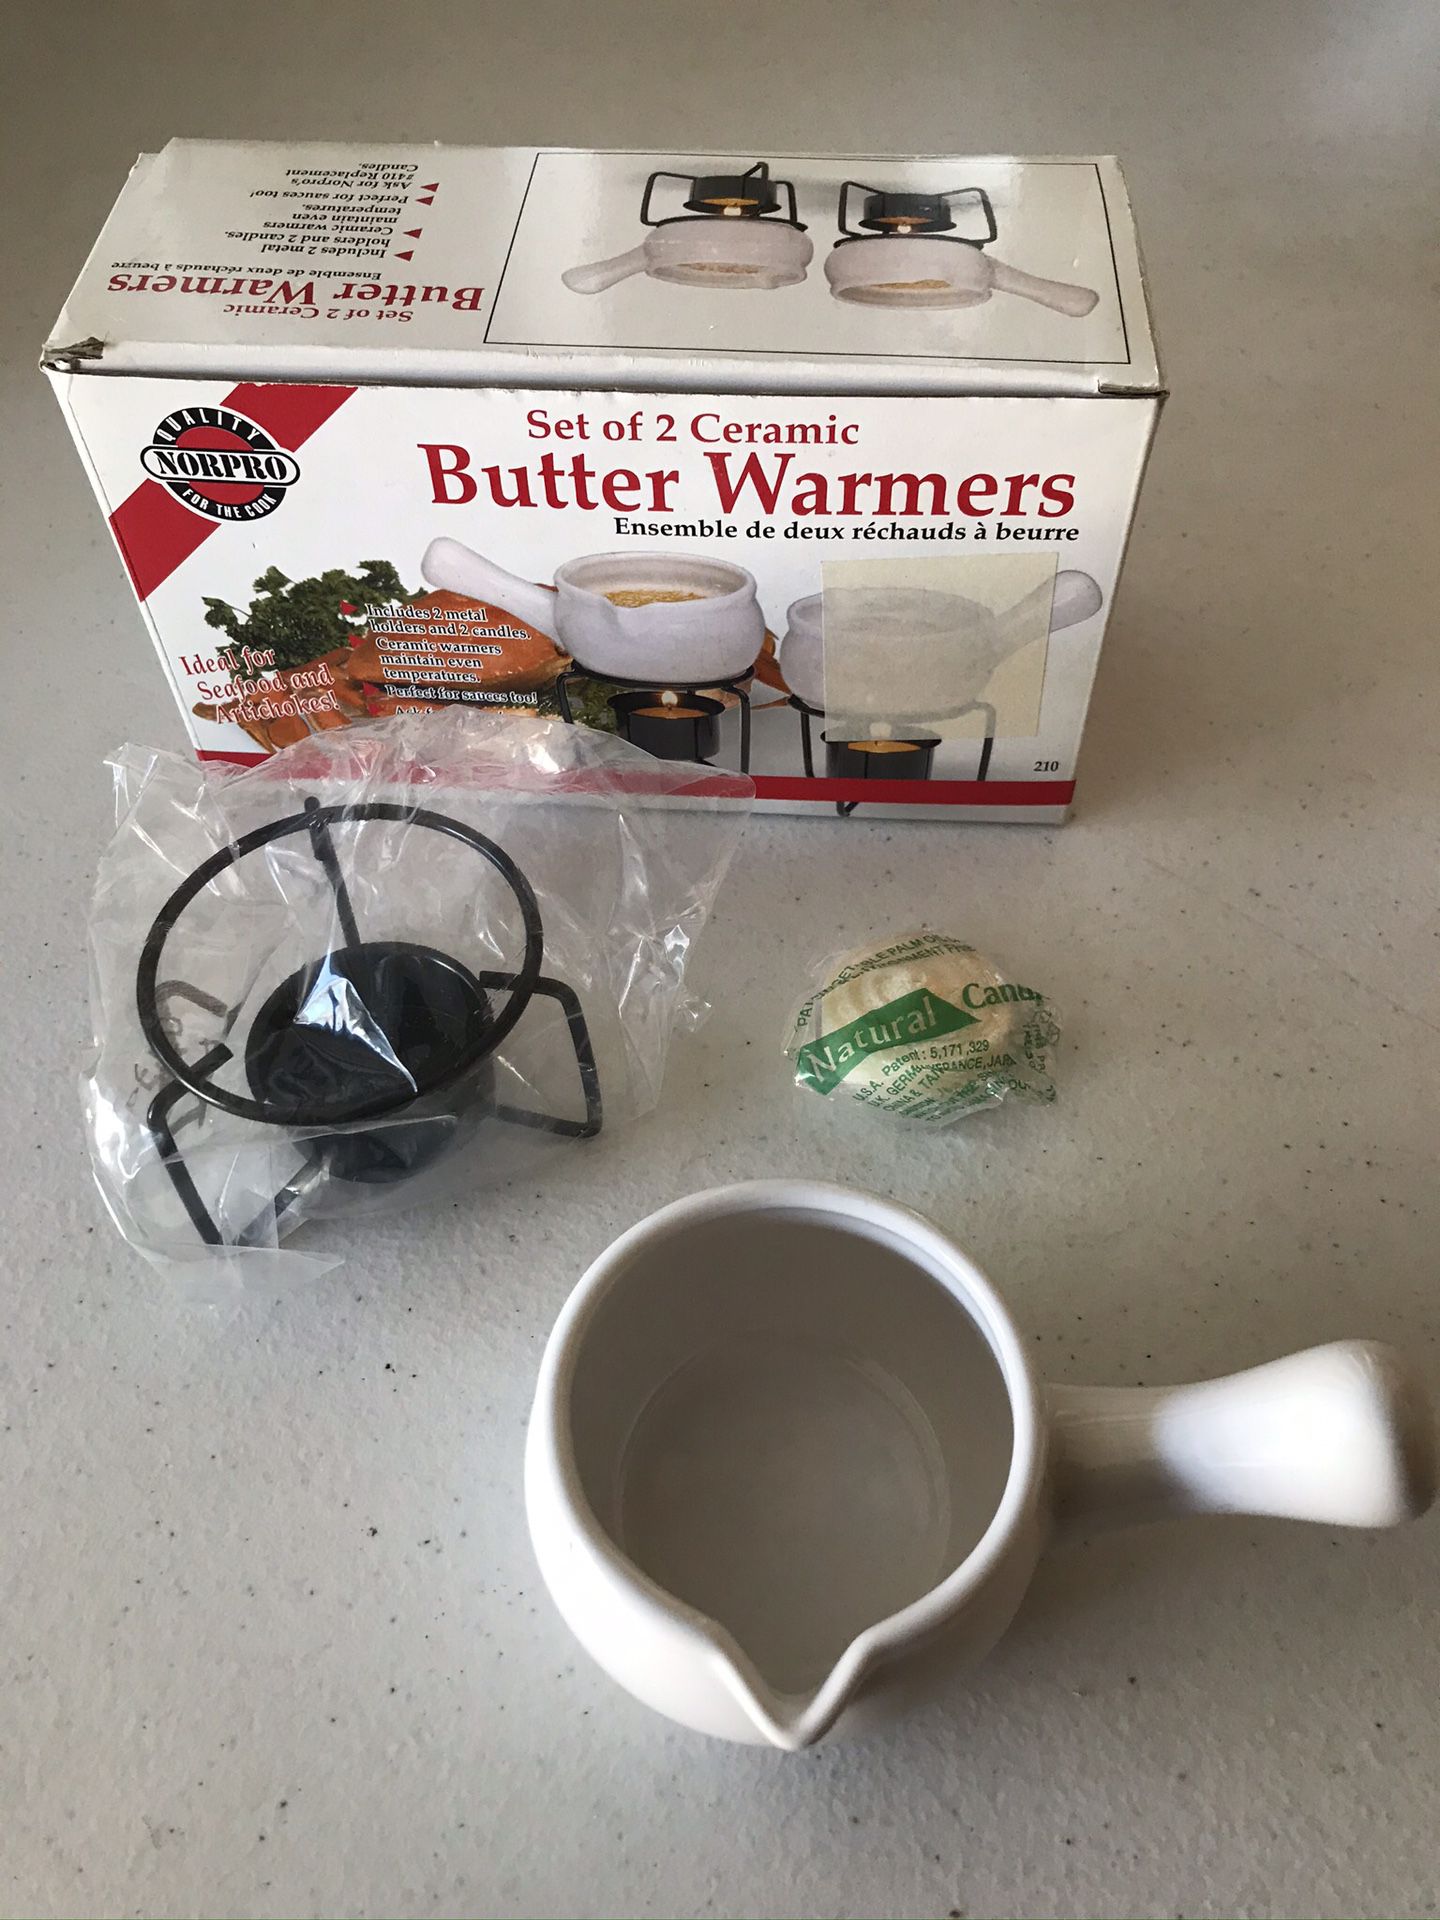 2 sets of 2 Ceramic Butter Warmers (4 total warmers) with Stand and candles